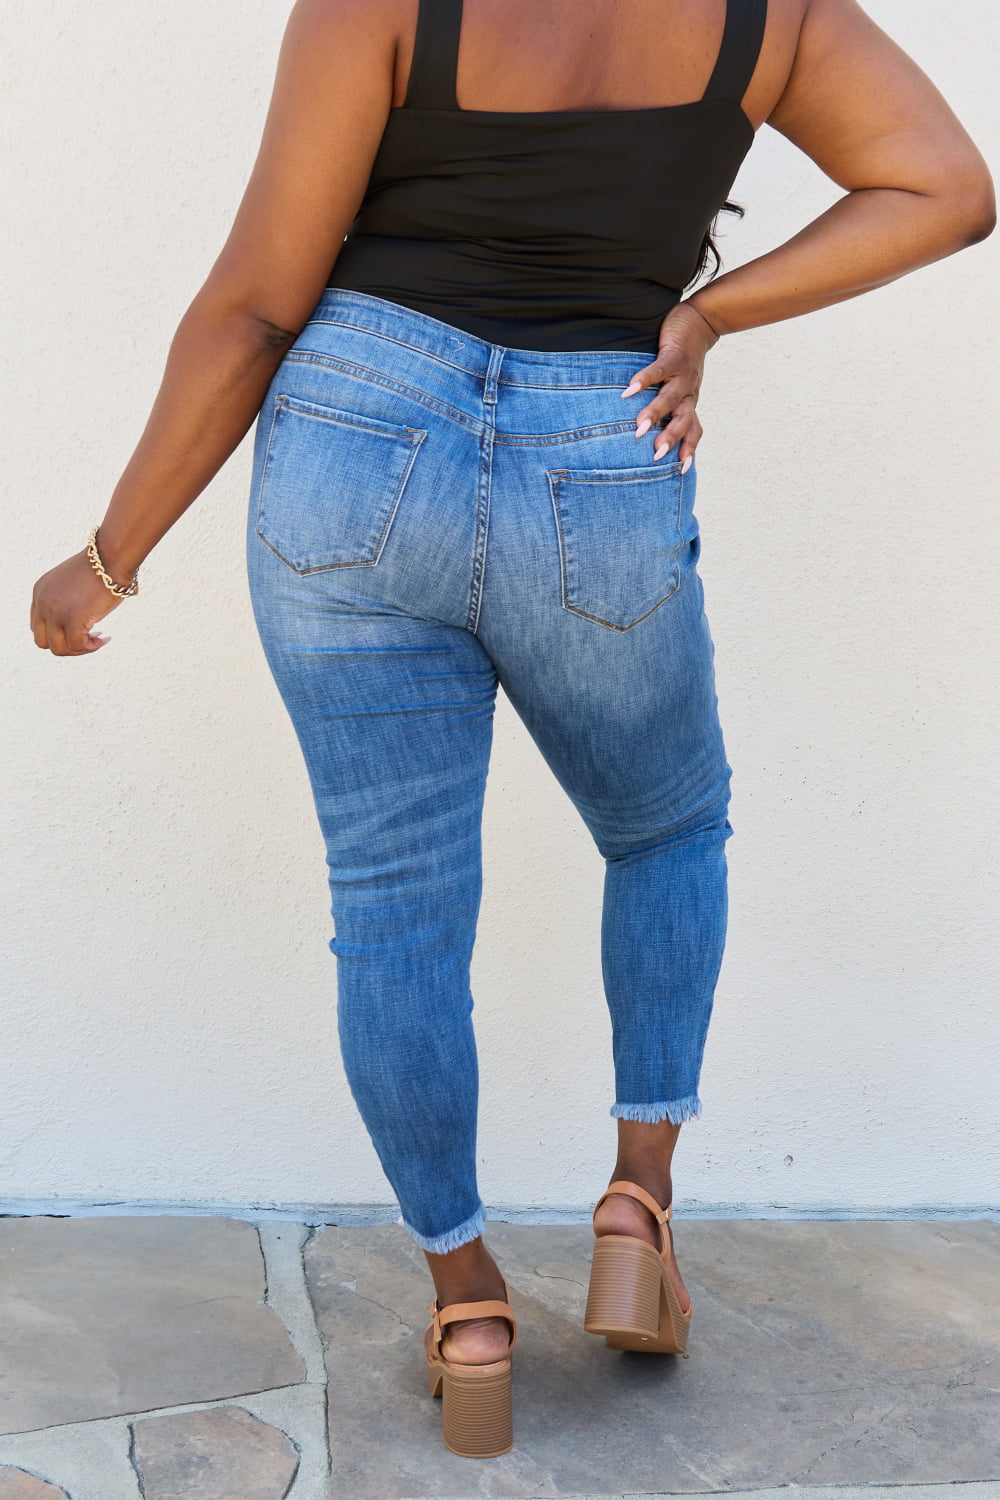 Back View, Plus Size, KanCan Mid Rise Destroyed Skinny Jeans Style KC7274M